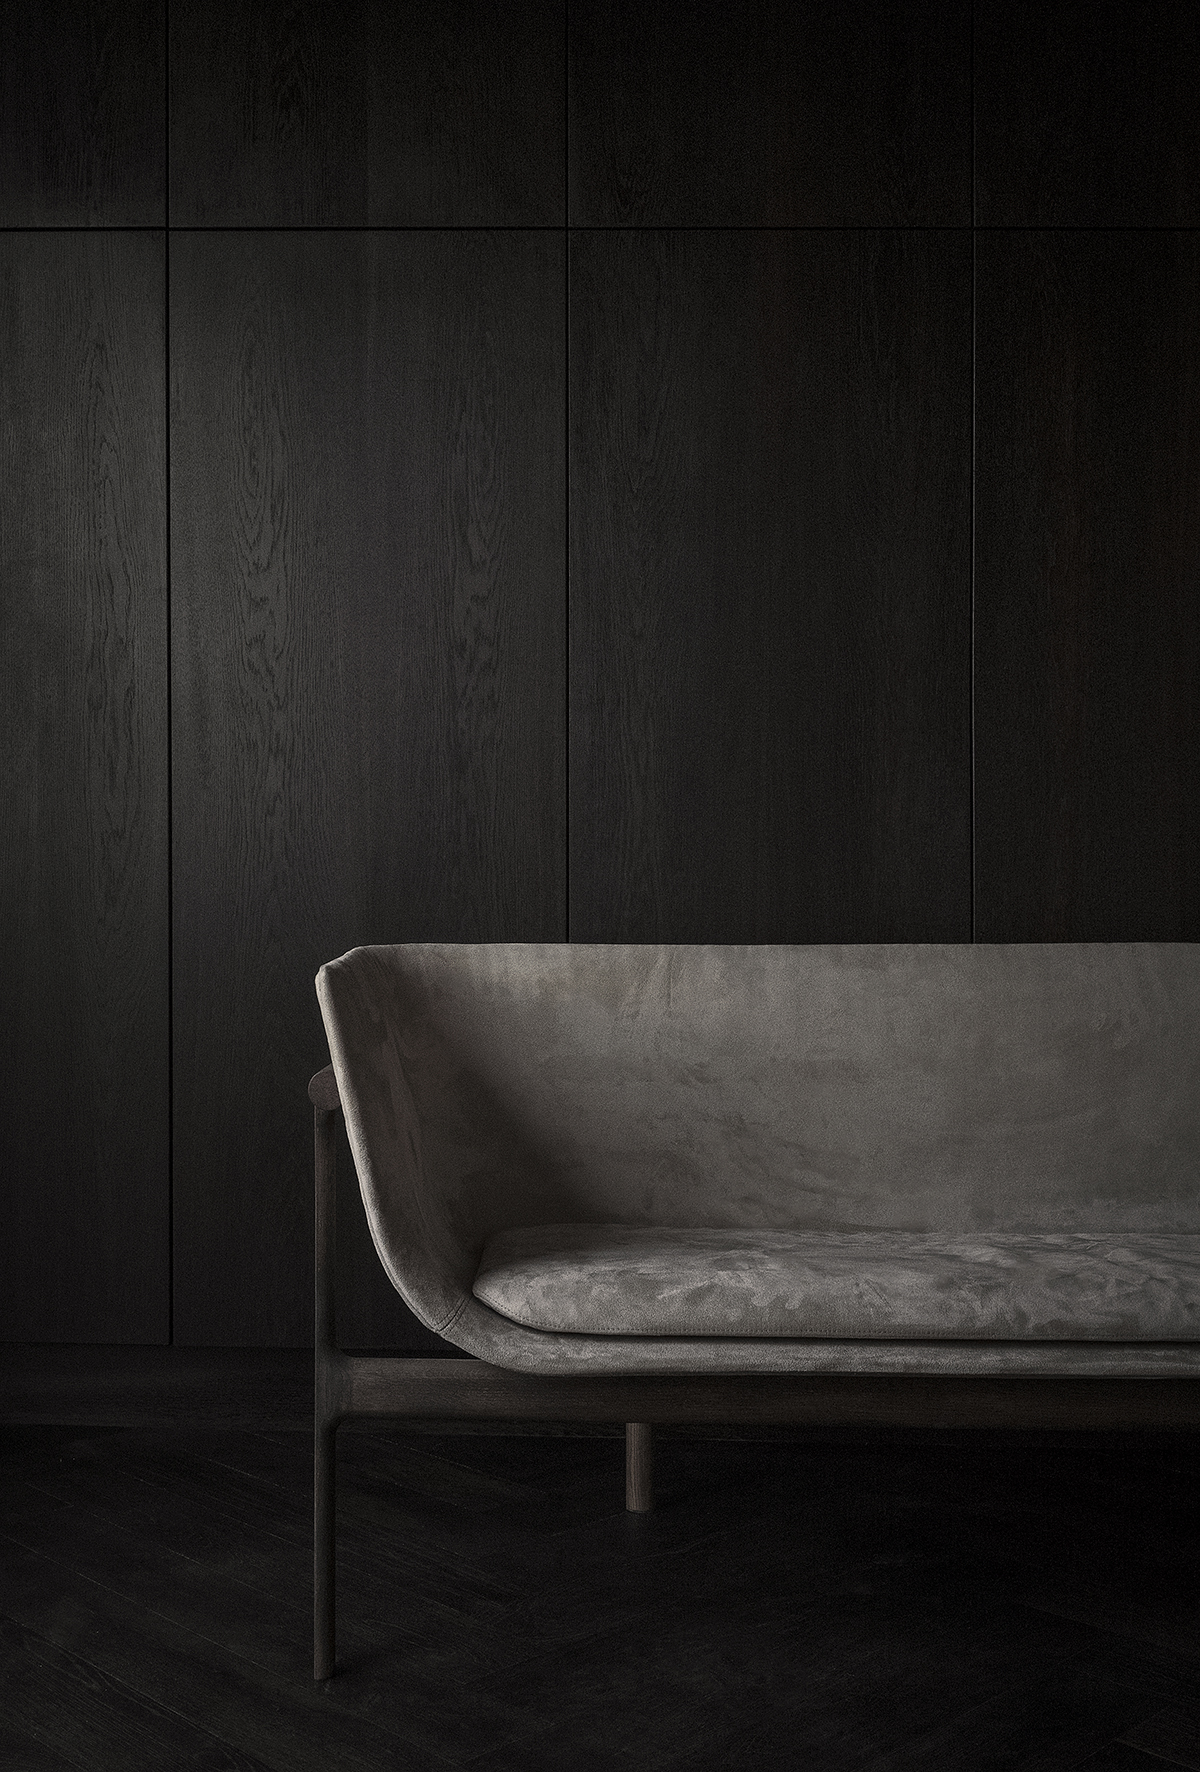 Dark Wood Paneling | DPAGES